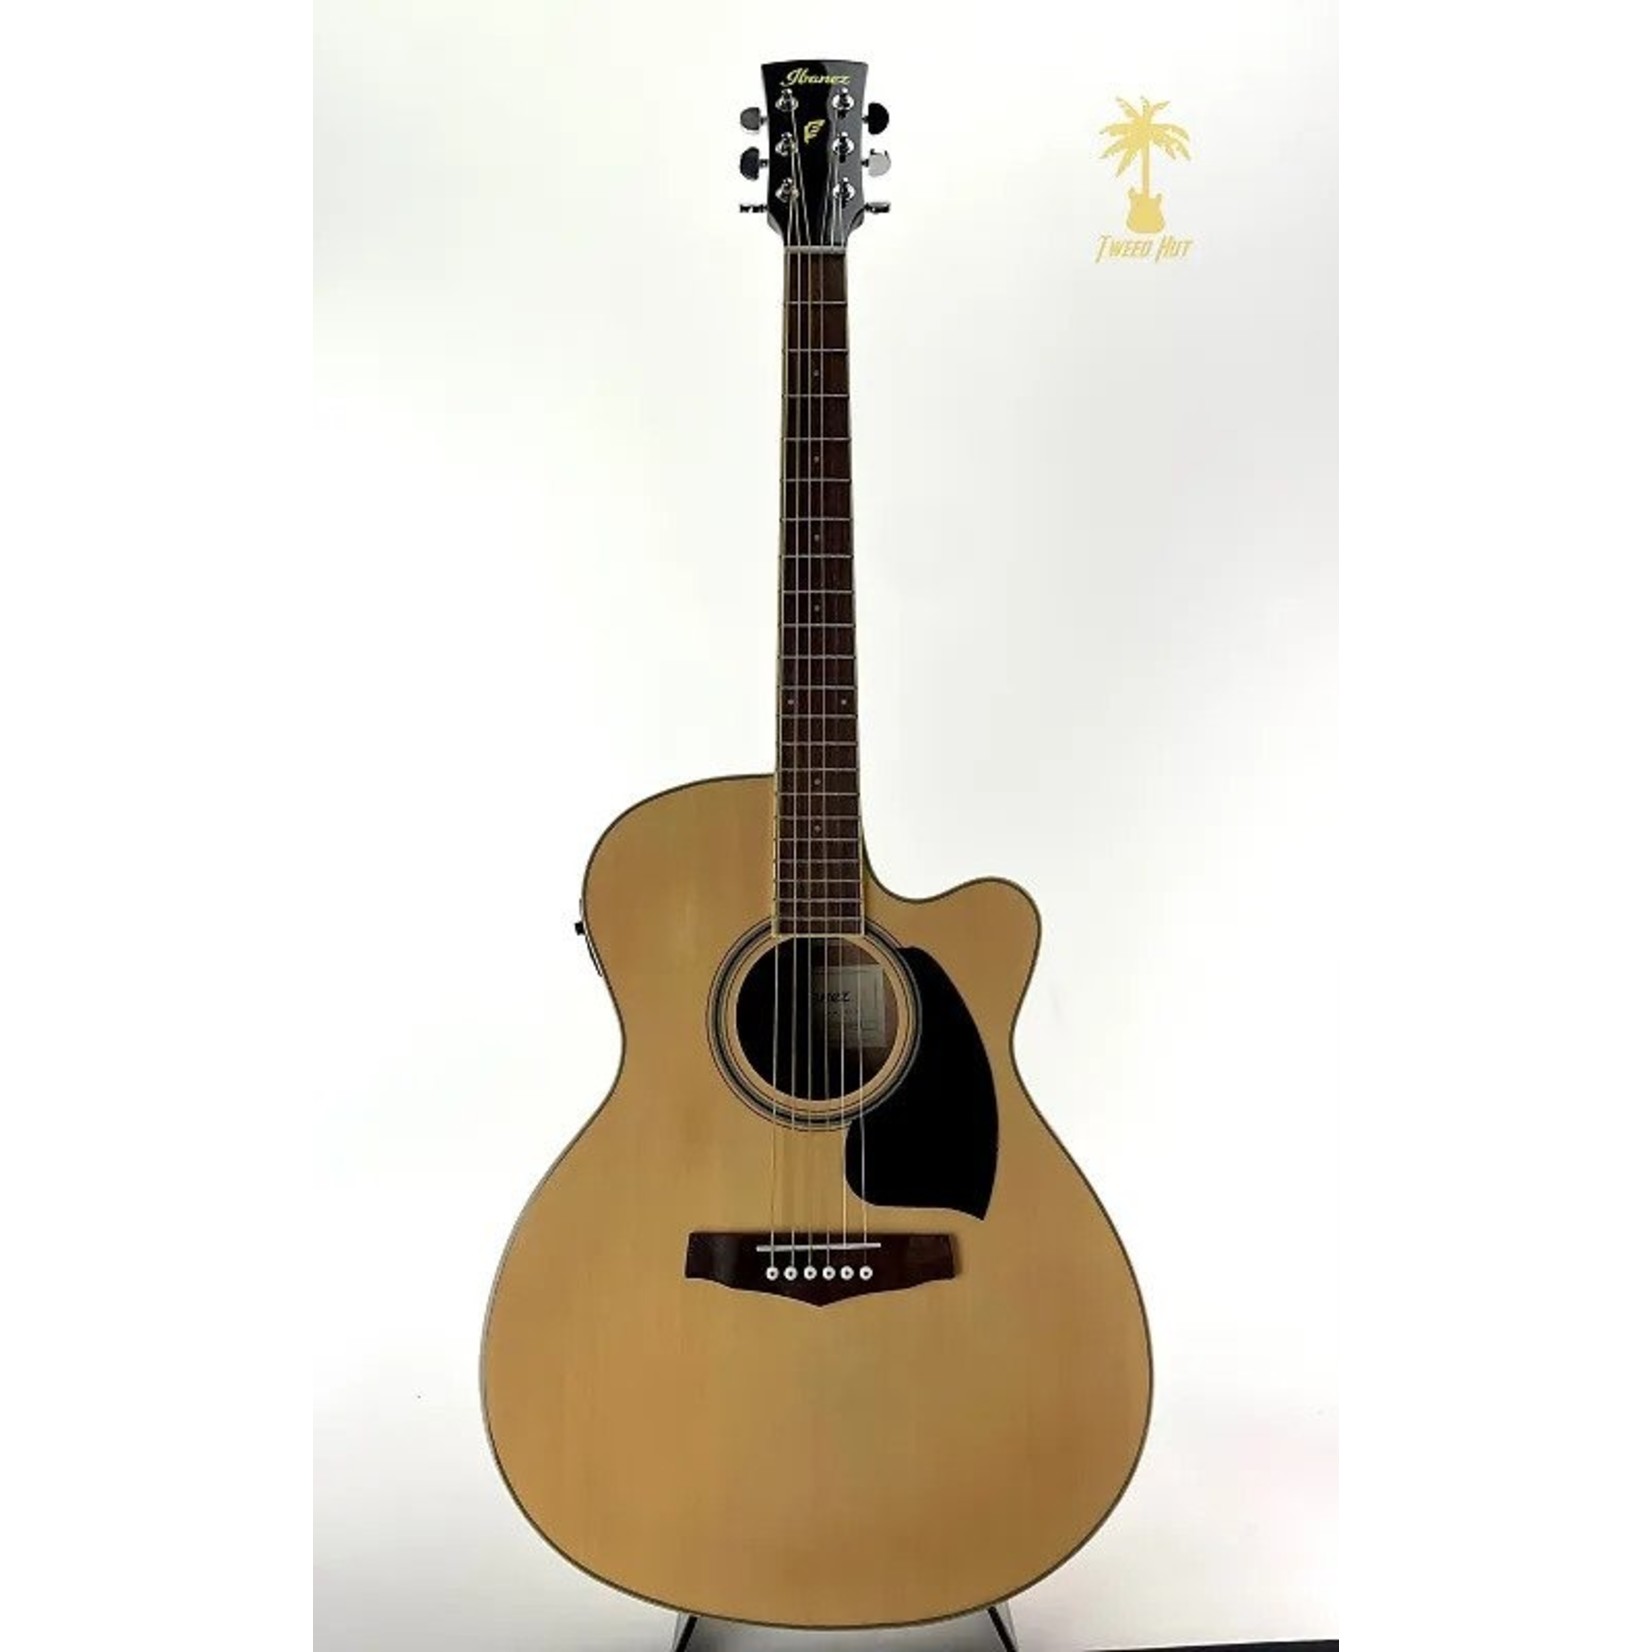 Ibanez Ibanez PC15ECENT Performance Grand Concert Acoustic-Electric Guitar Natural